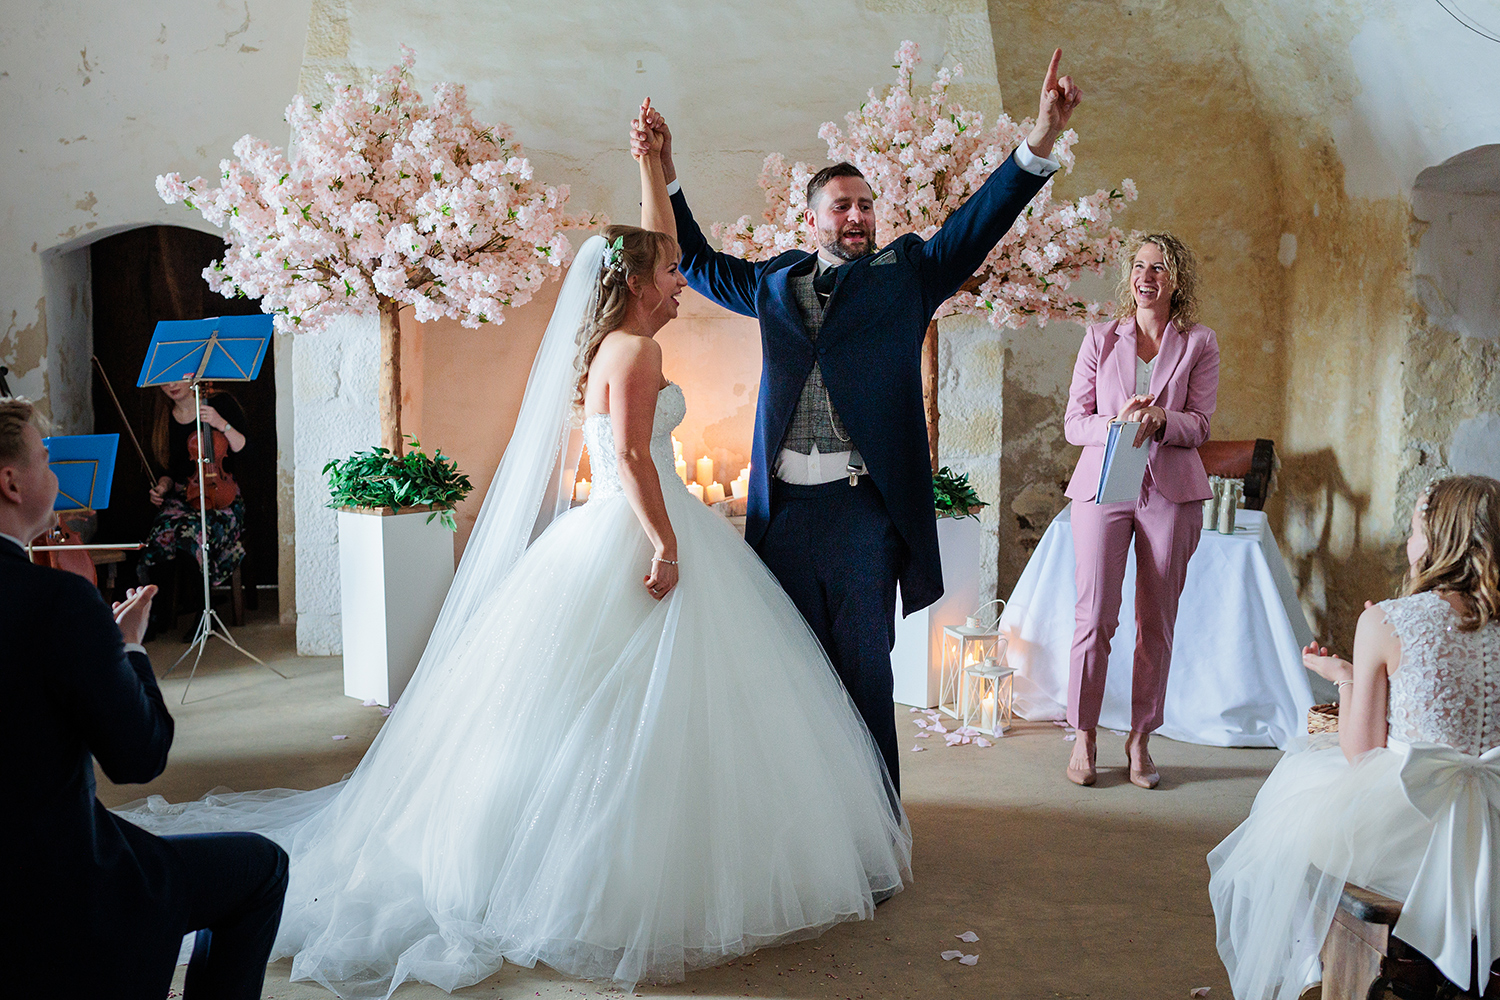 The groom throws his arms up in the air triumphantly as he and his bride become legally married at Mont Orgueil Castle, Jersey